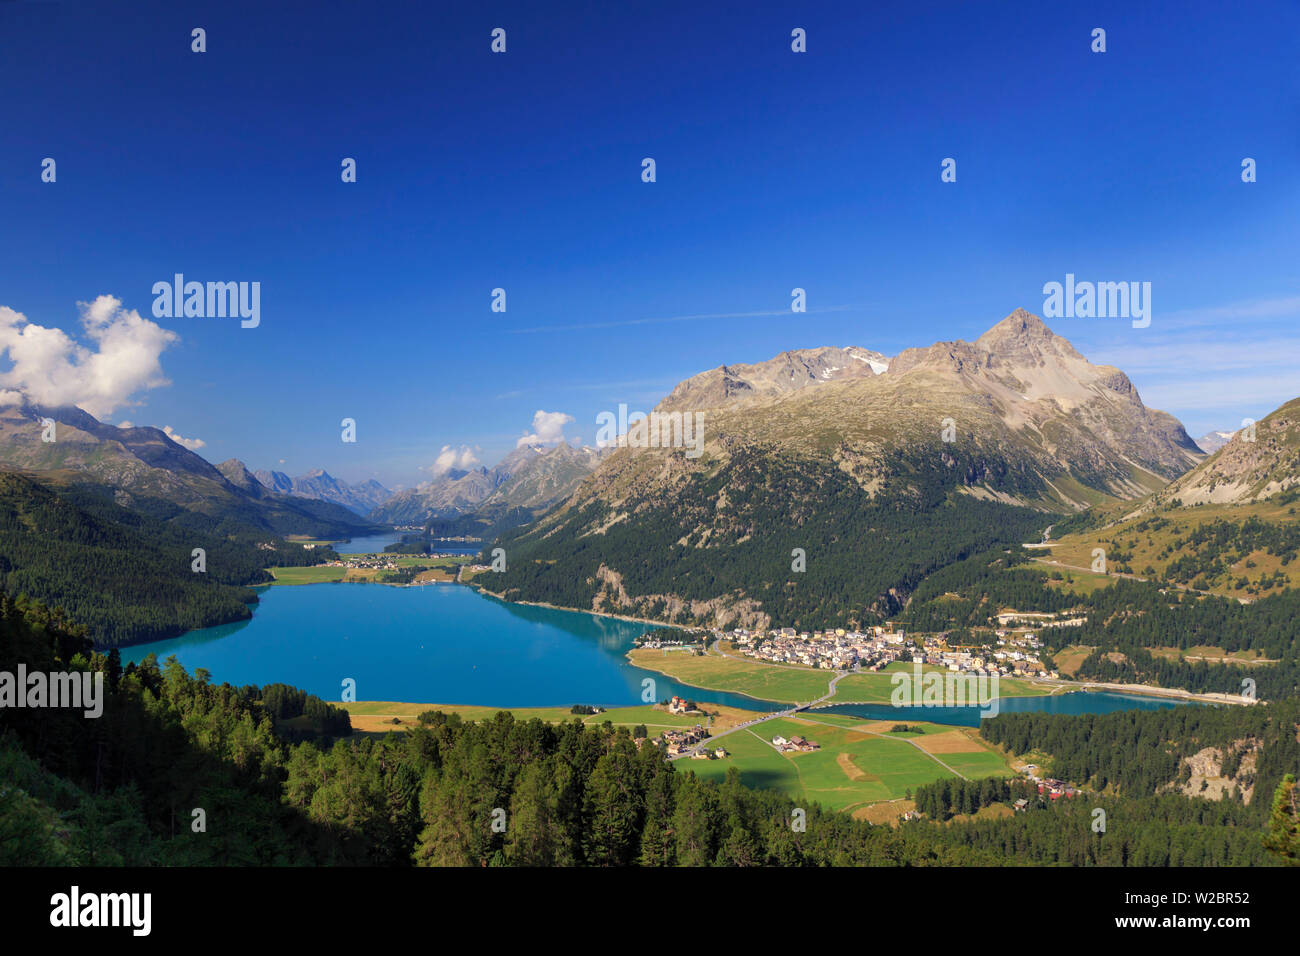 Switzerland, Graubunden, Upper Engadine, St. Moritz, elevated view of the valley and lakes Stock Photo